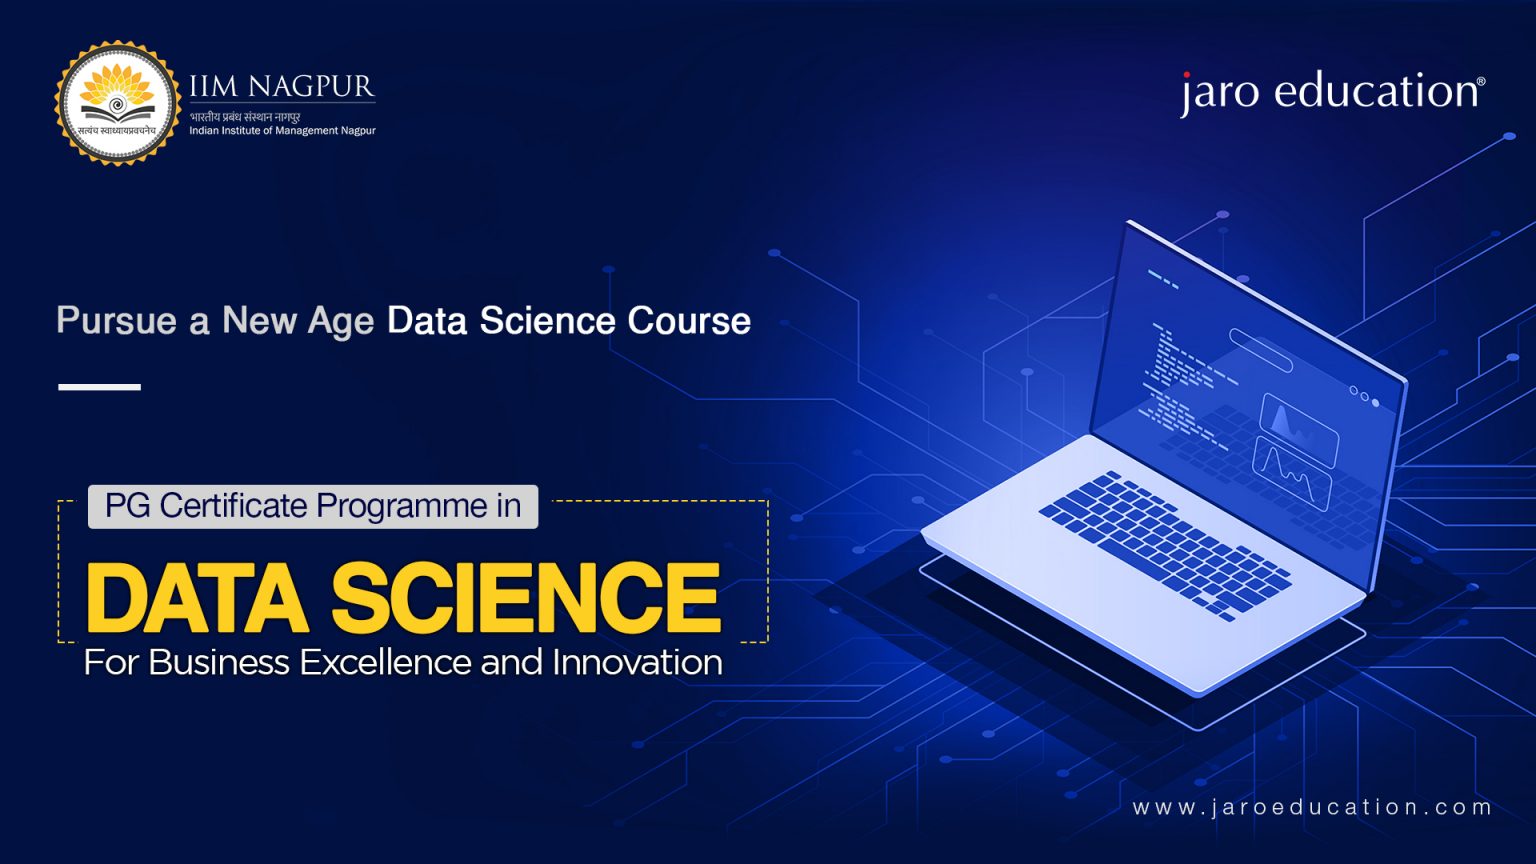 Why should I pursue an IIM Nagpur Data Science course online?